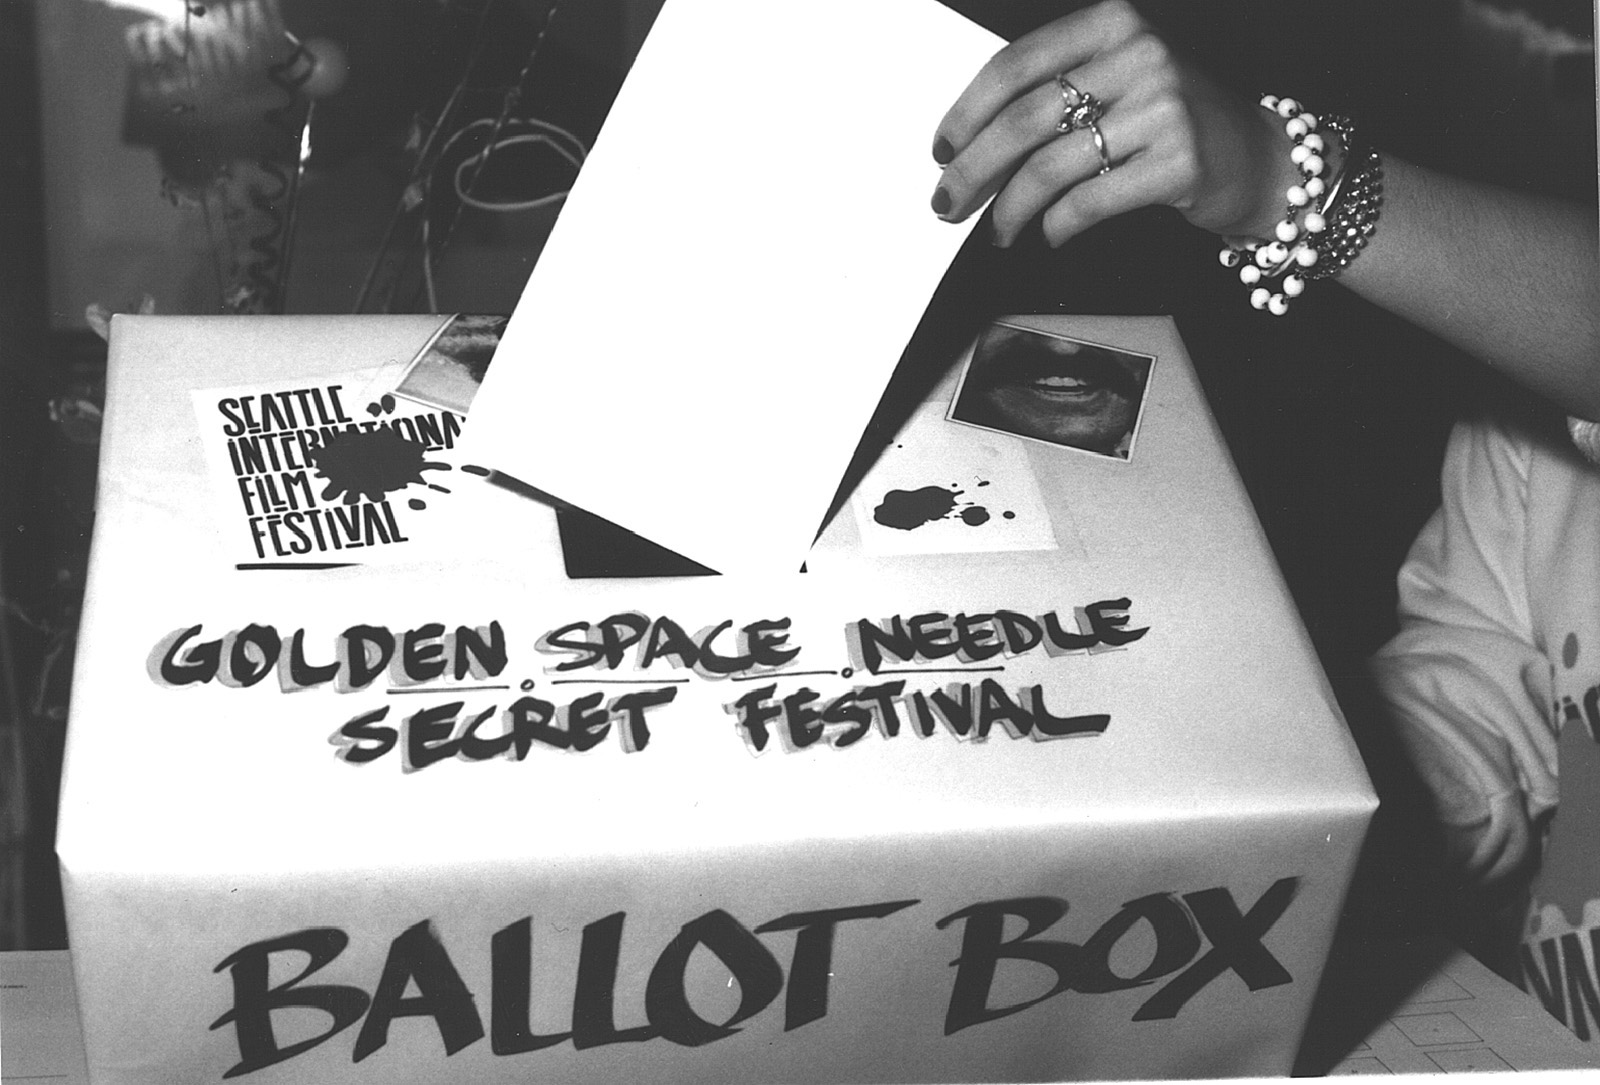 Behold! A ballot box for the Golden Space Needle Awards, established just one year earlier during the 1985 fest